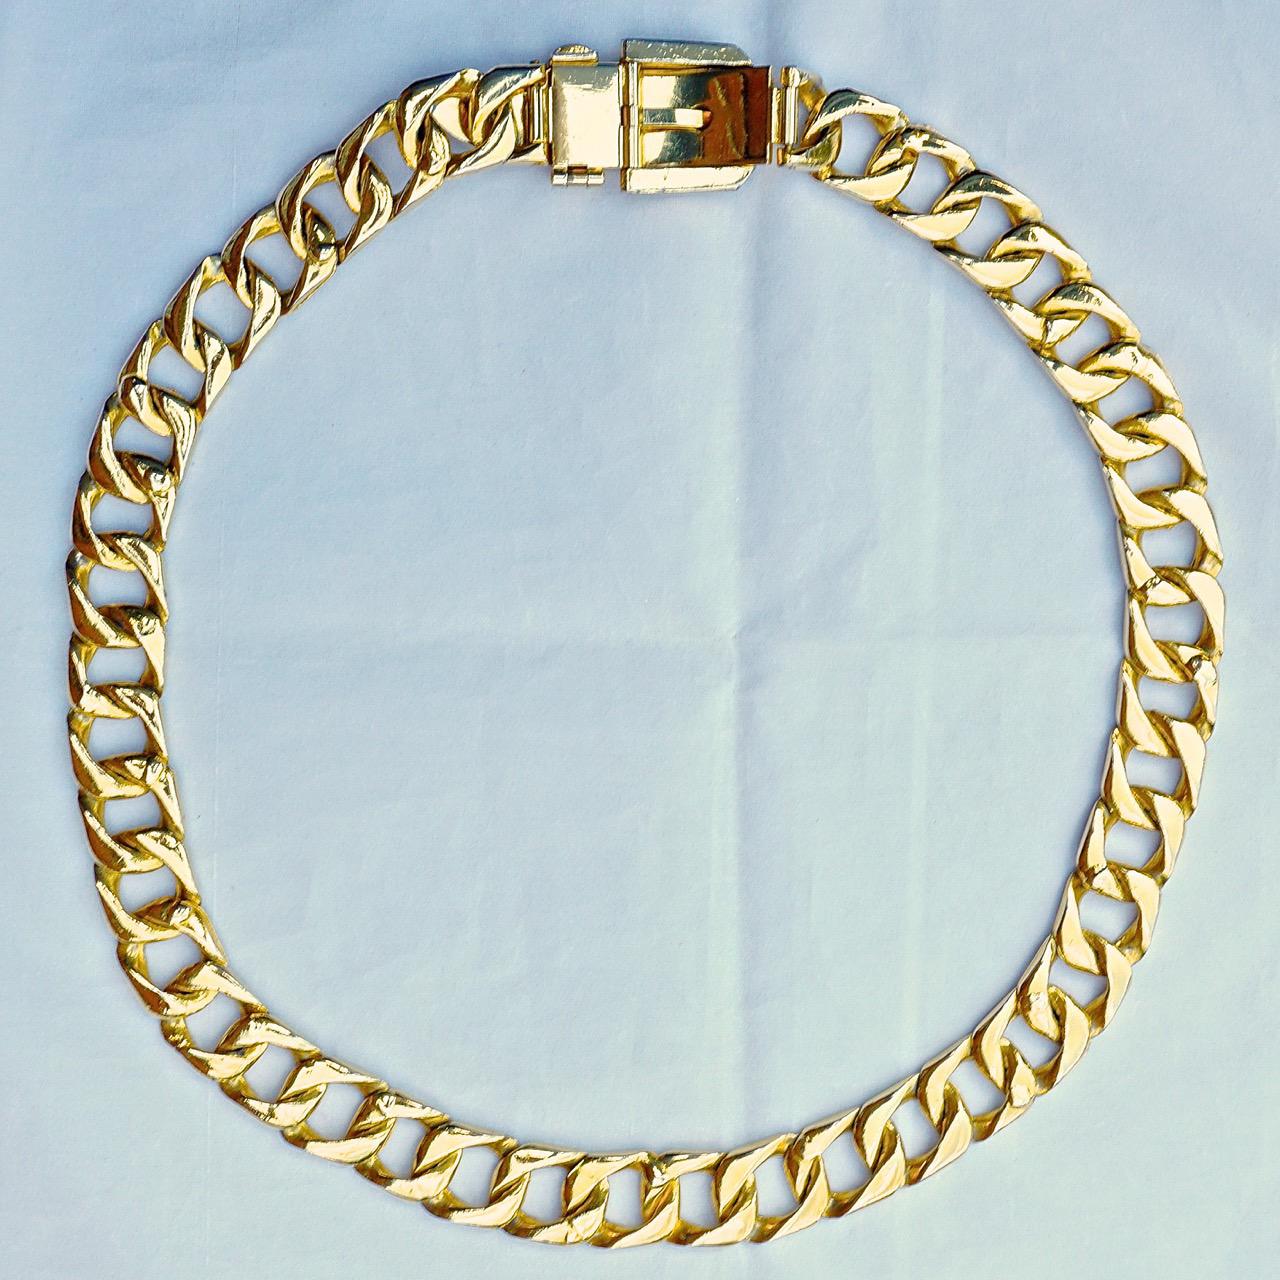 Gold Plated Heavy Adjustable Curb Link Chain Buckle Belt circa 1980s 3